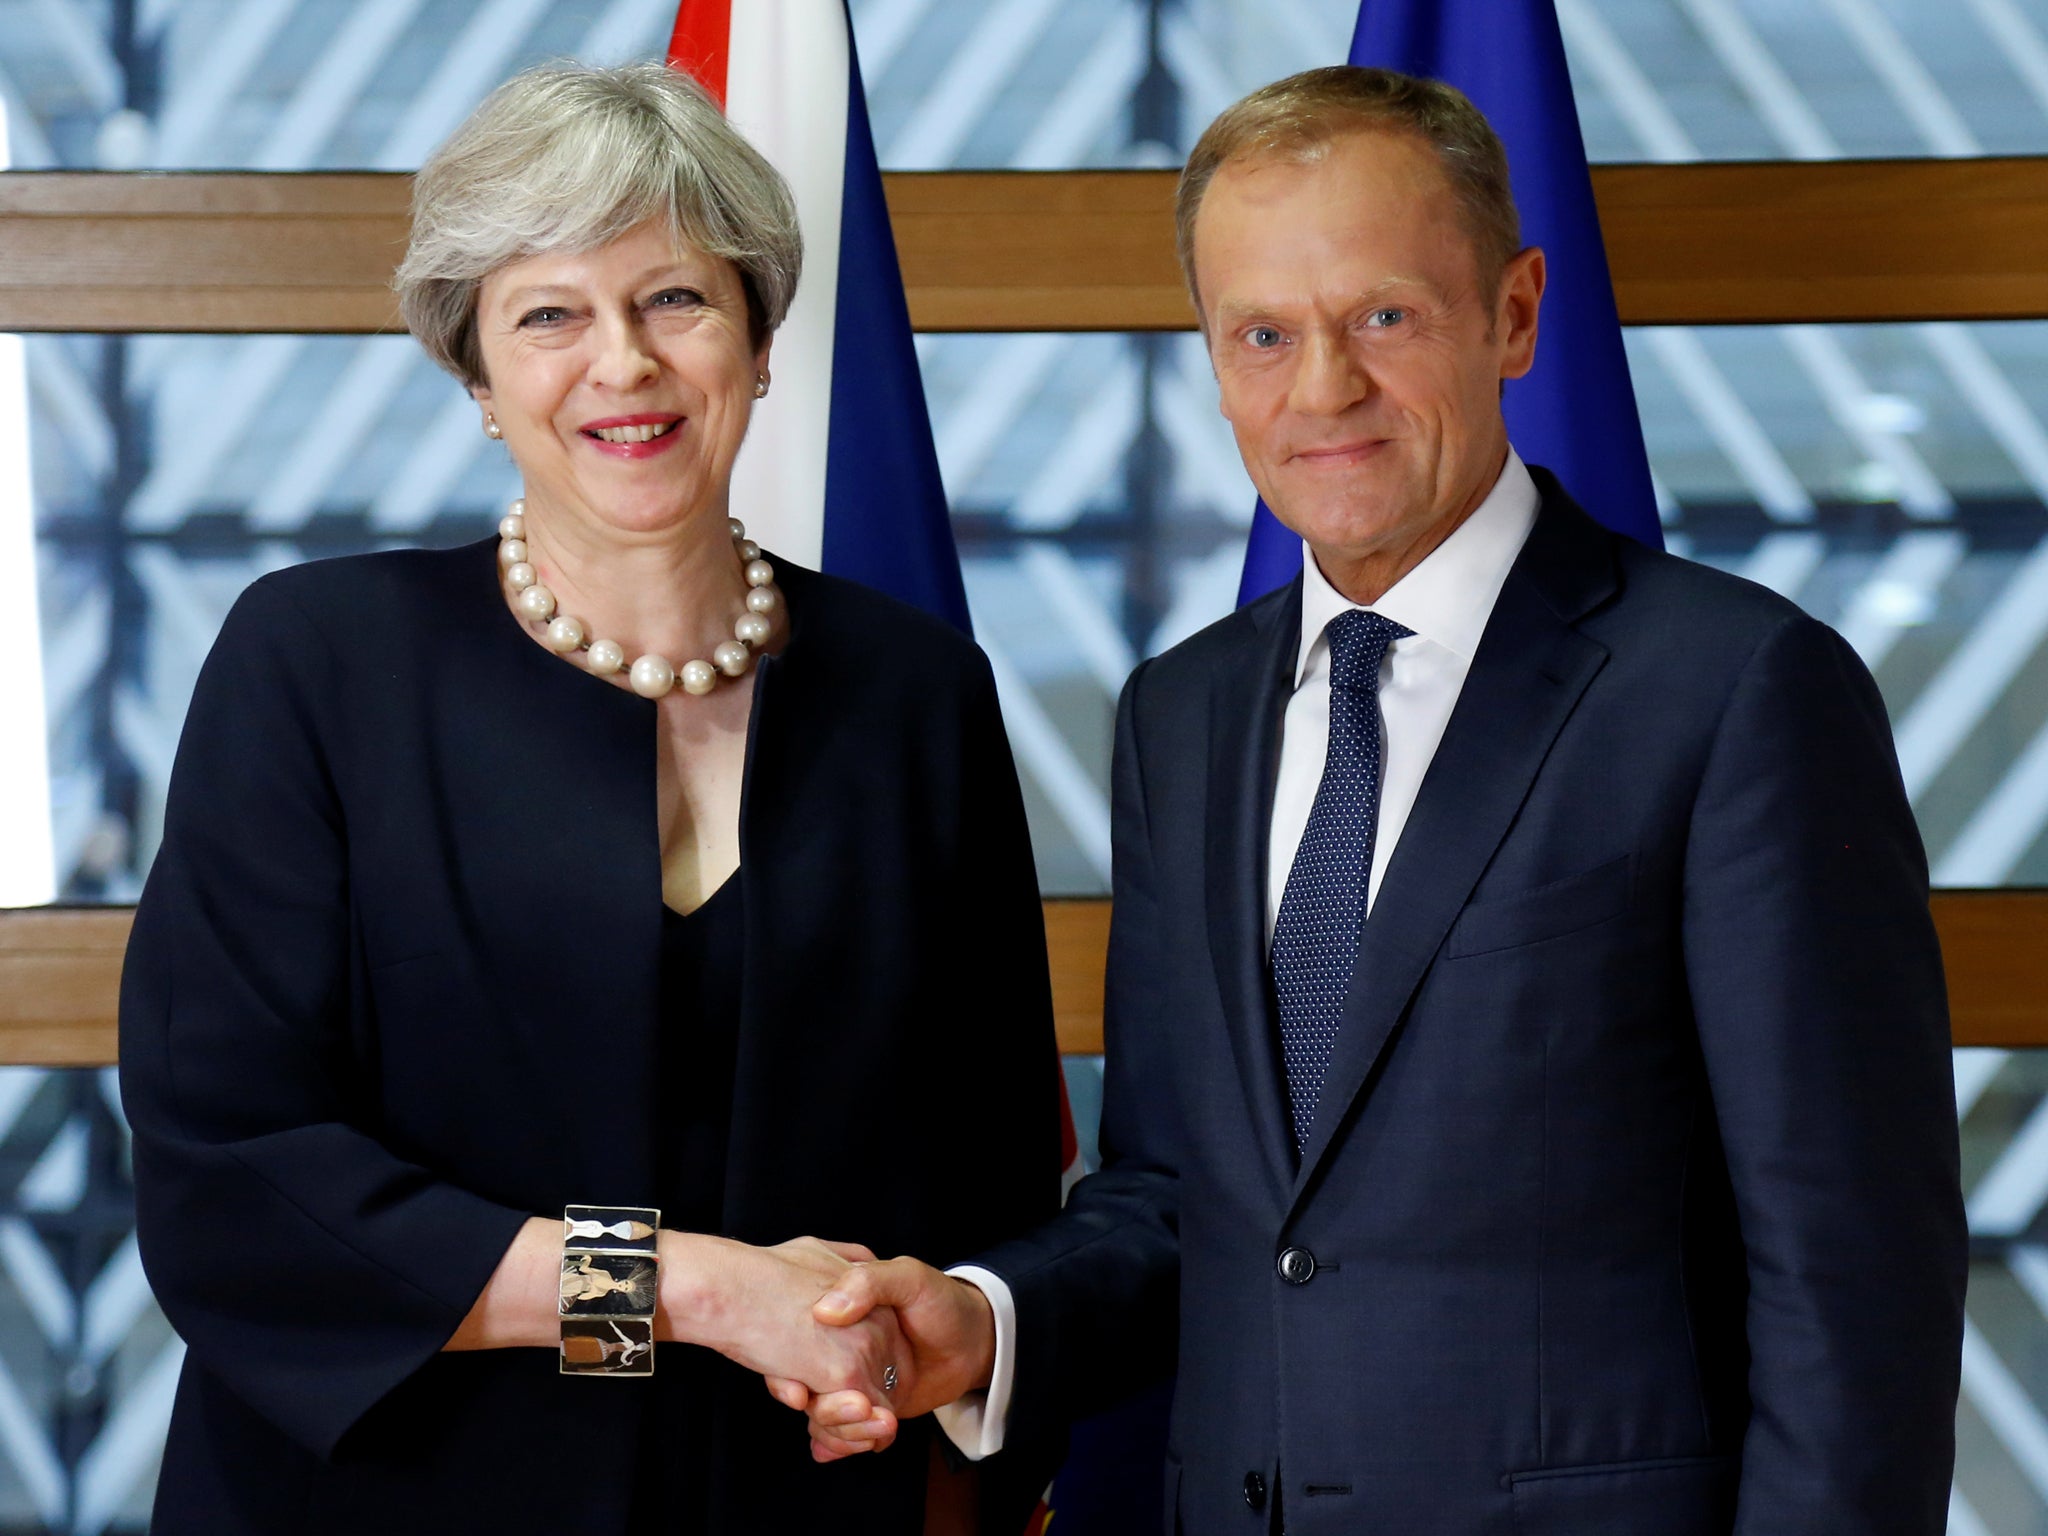 Prime Minister Theresa May and European Council President Donald Tusk pose during an EU leaders summit in Brussels